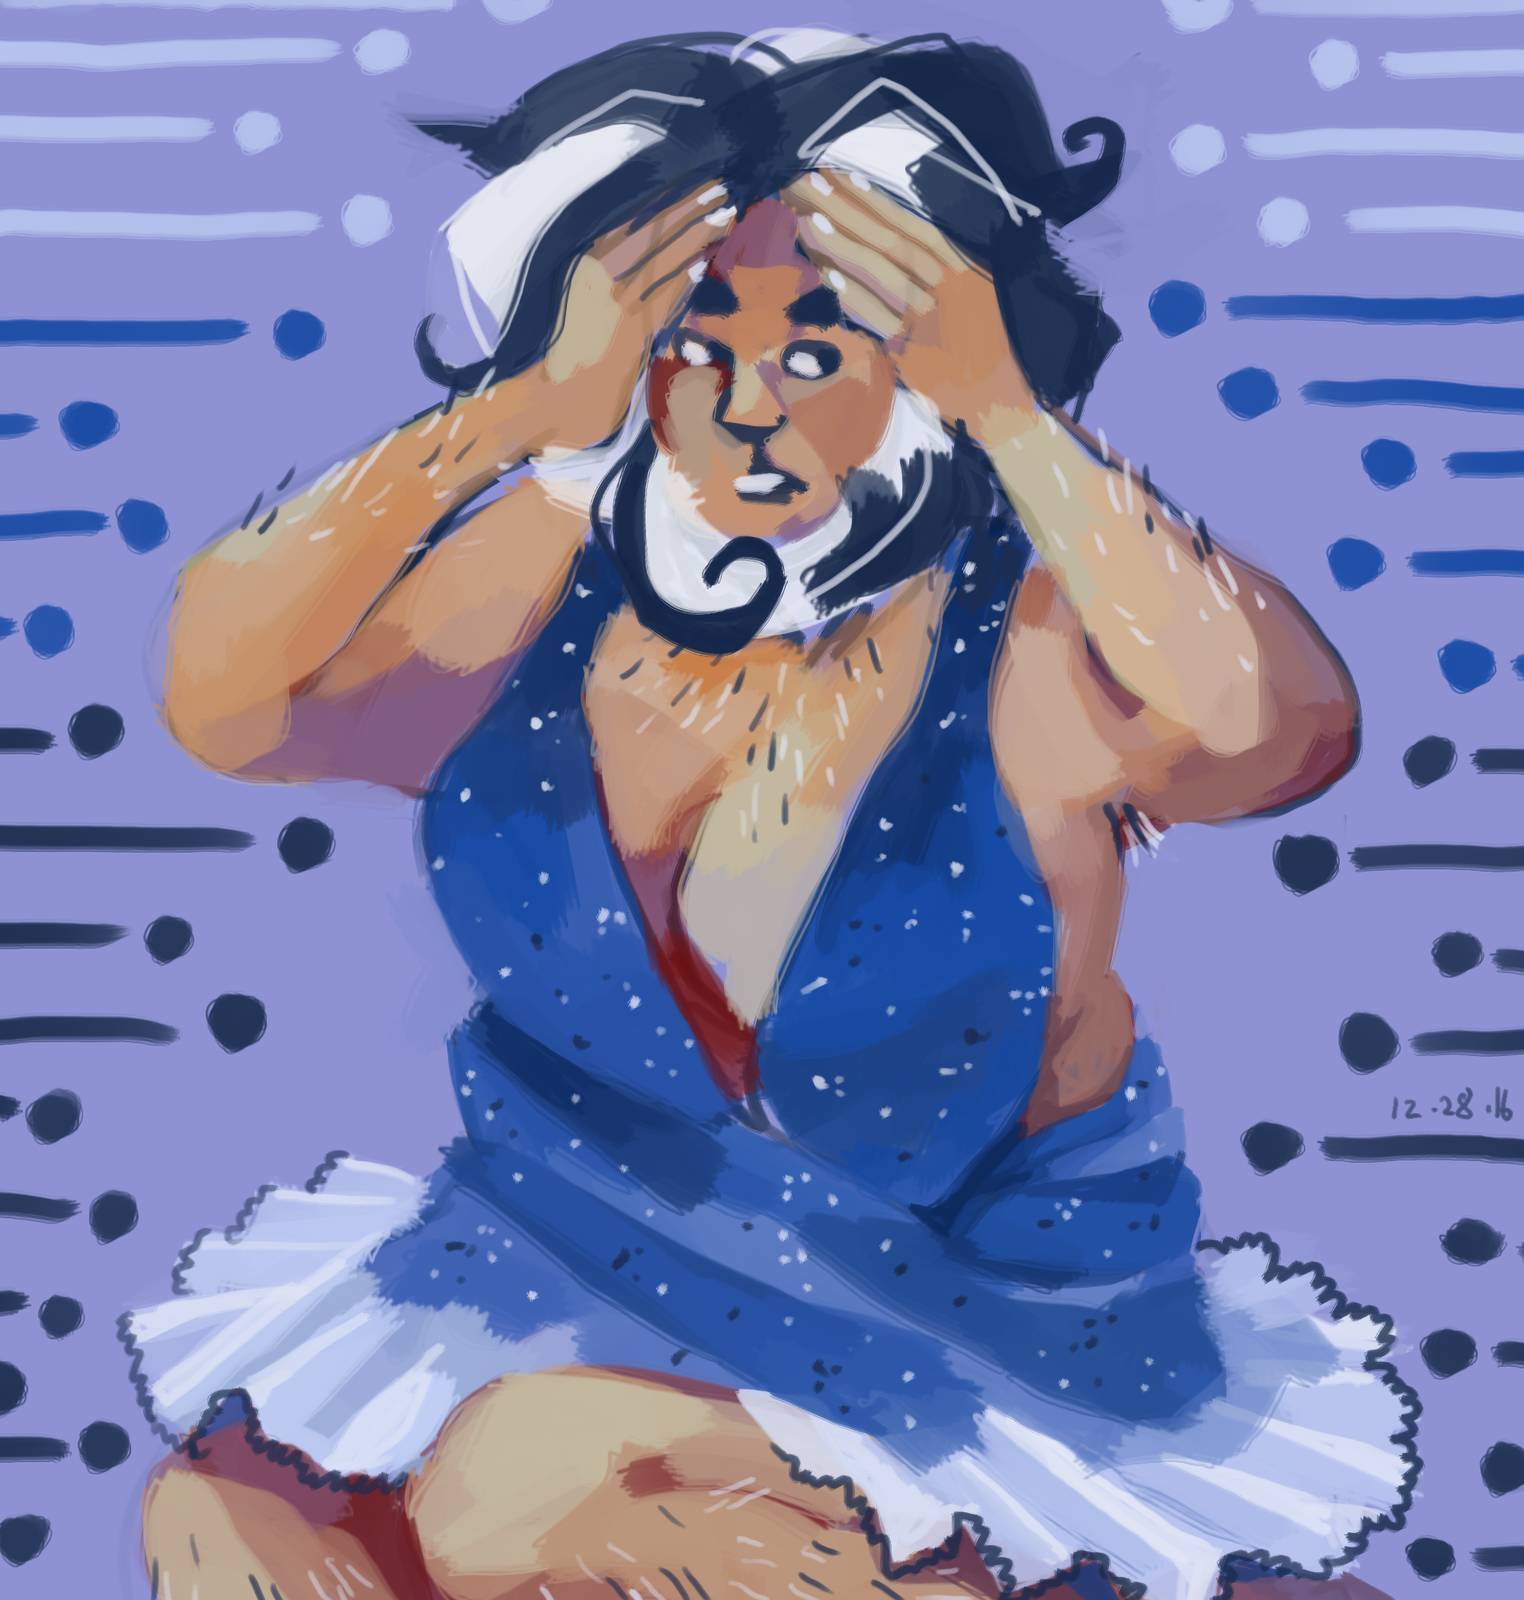 Salt and pepper haired lion in a blue dress seems to be having some kind of crisis.